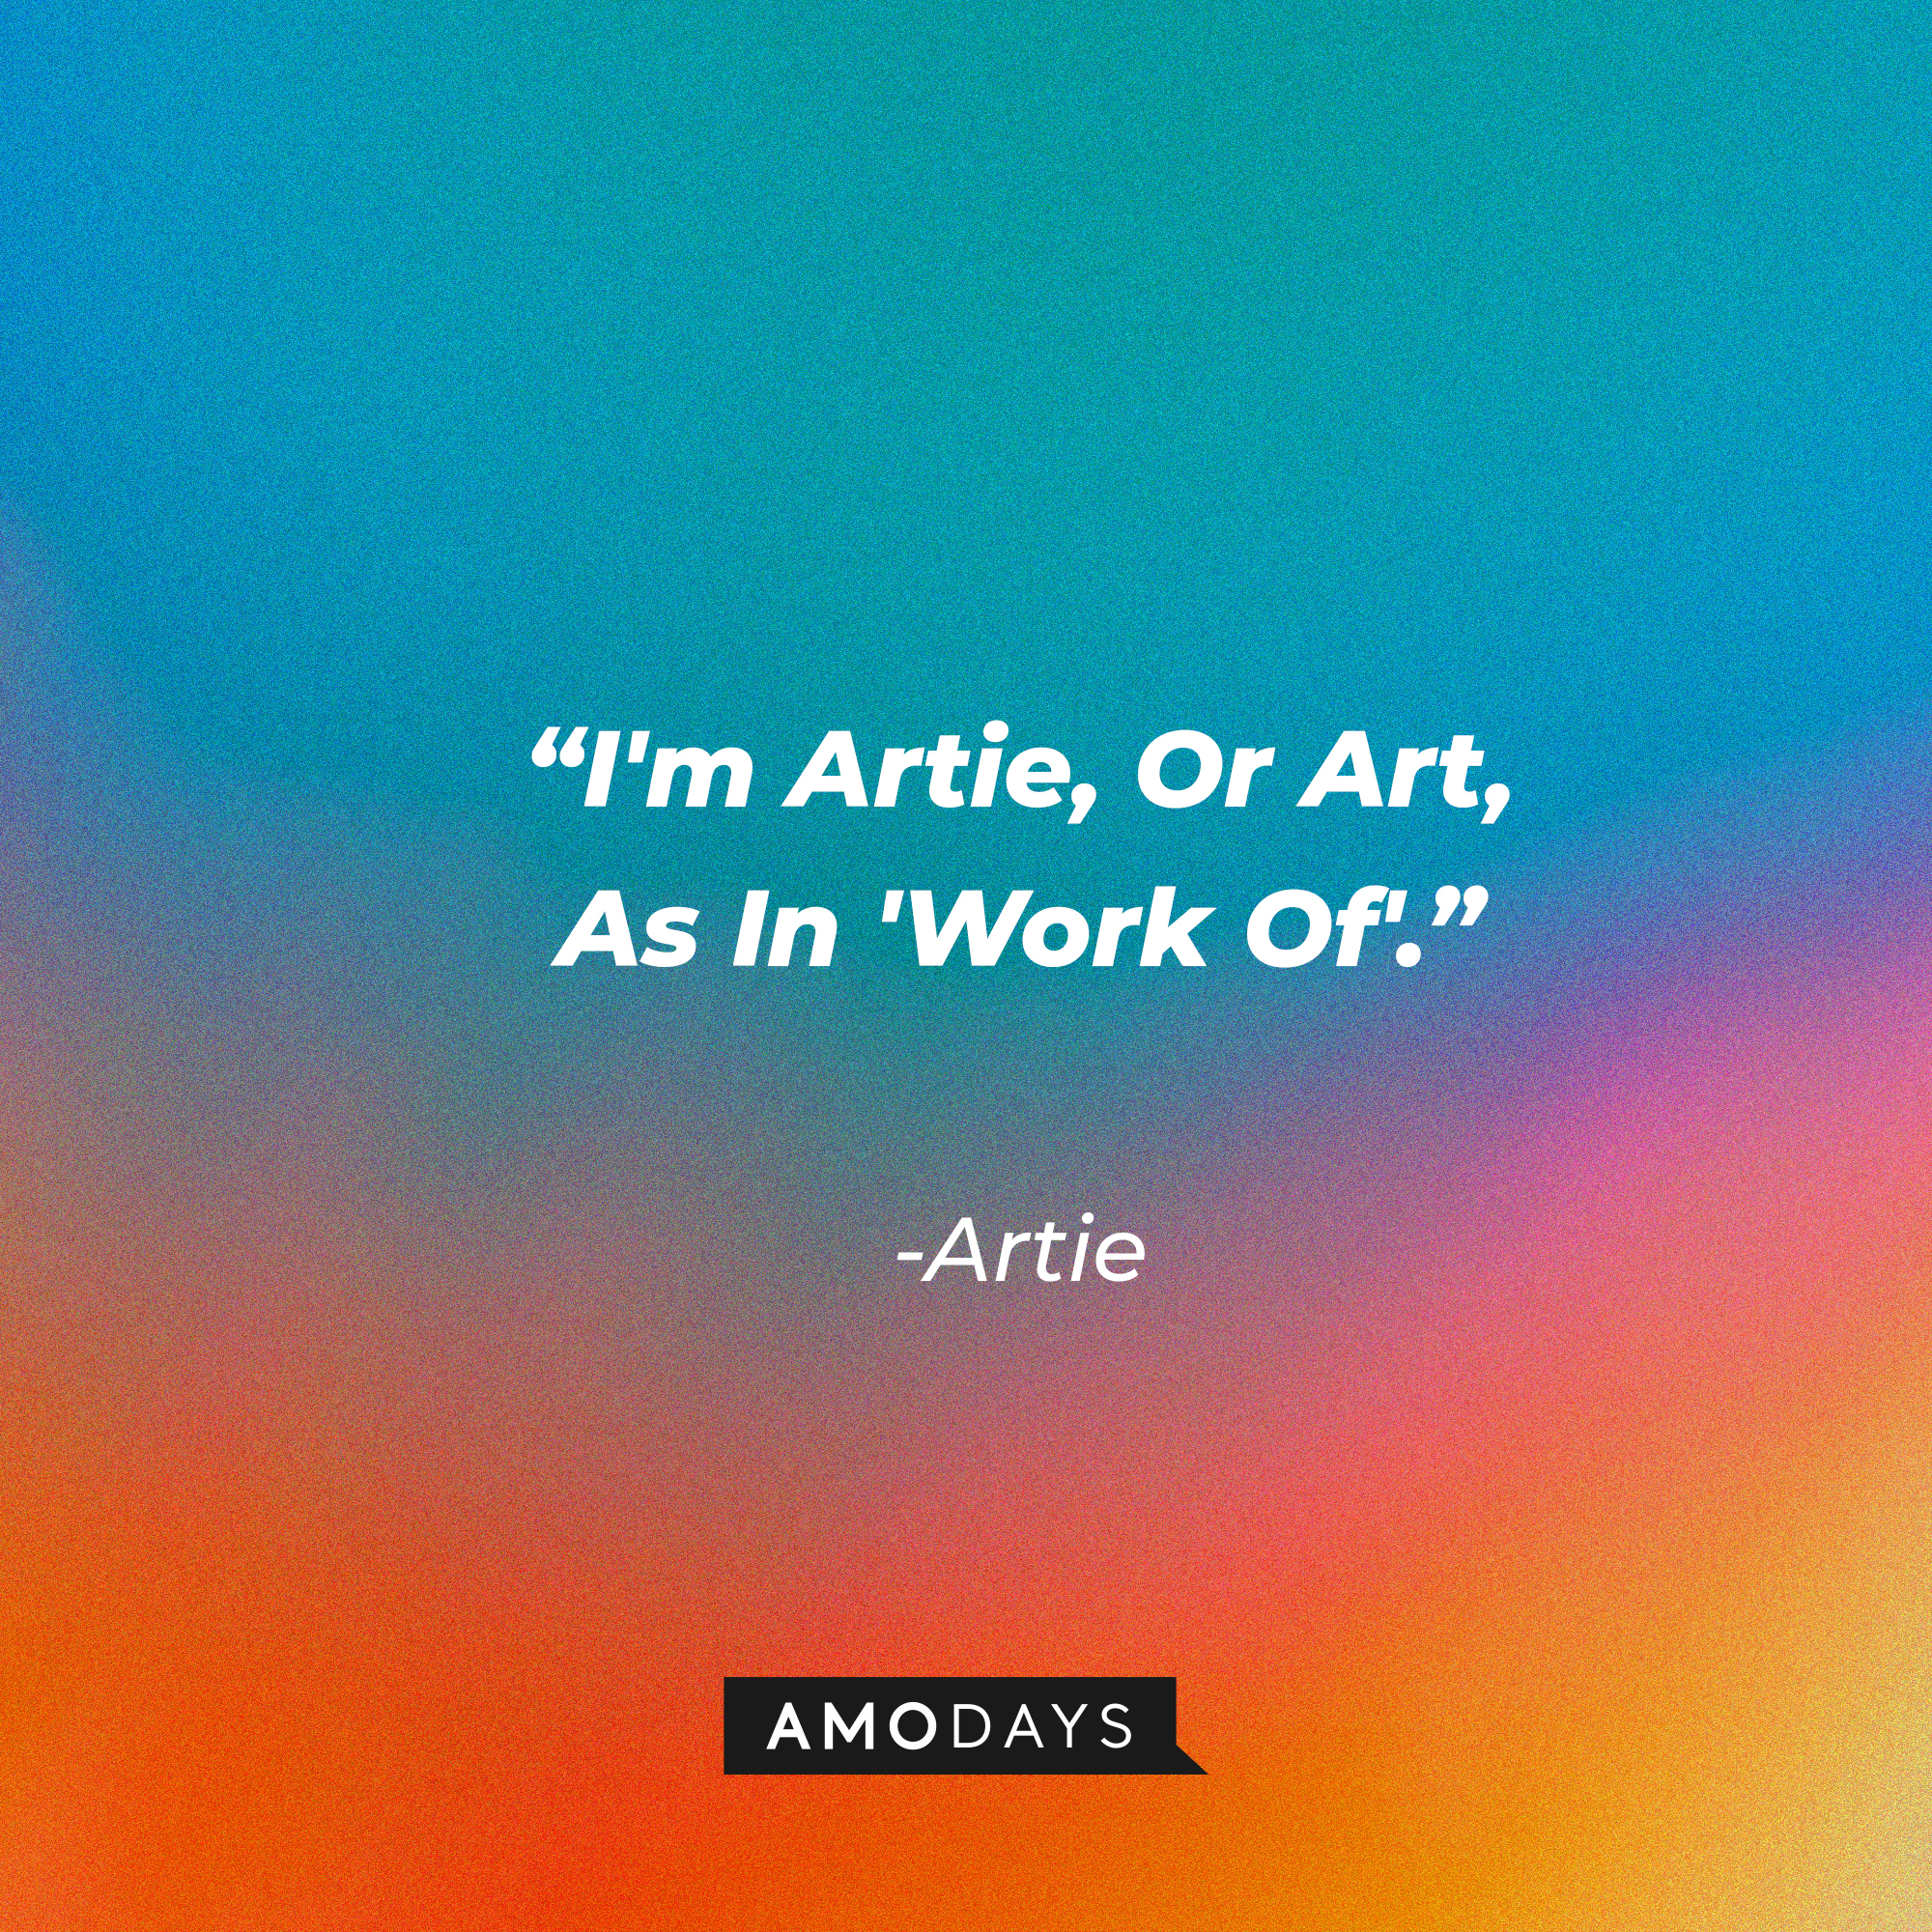 Artie's quote: "I'm Artie, Or Art, As In 'Work Of'." | Source: Amodays